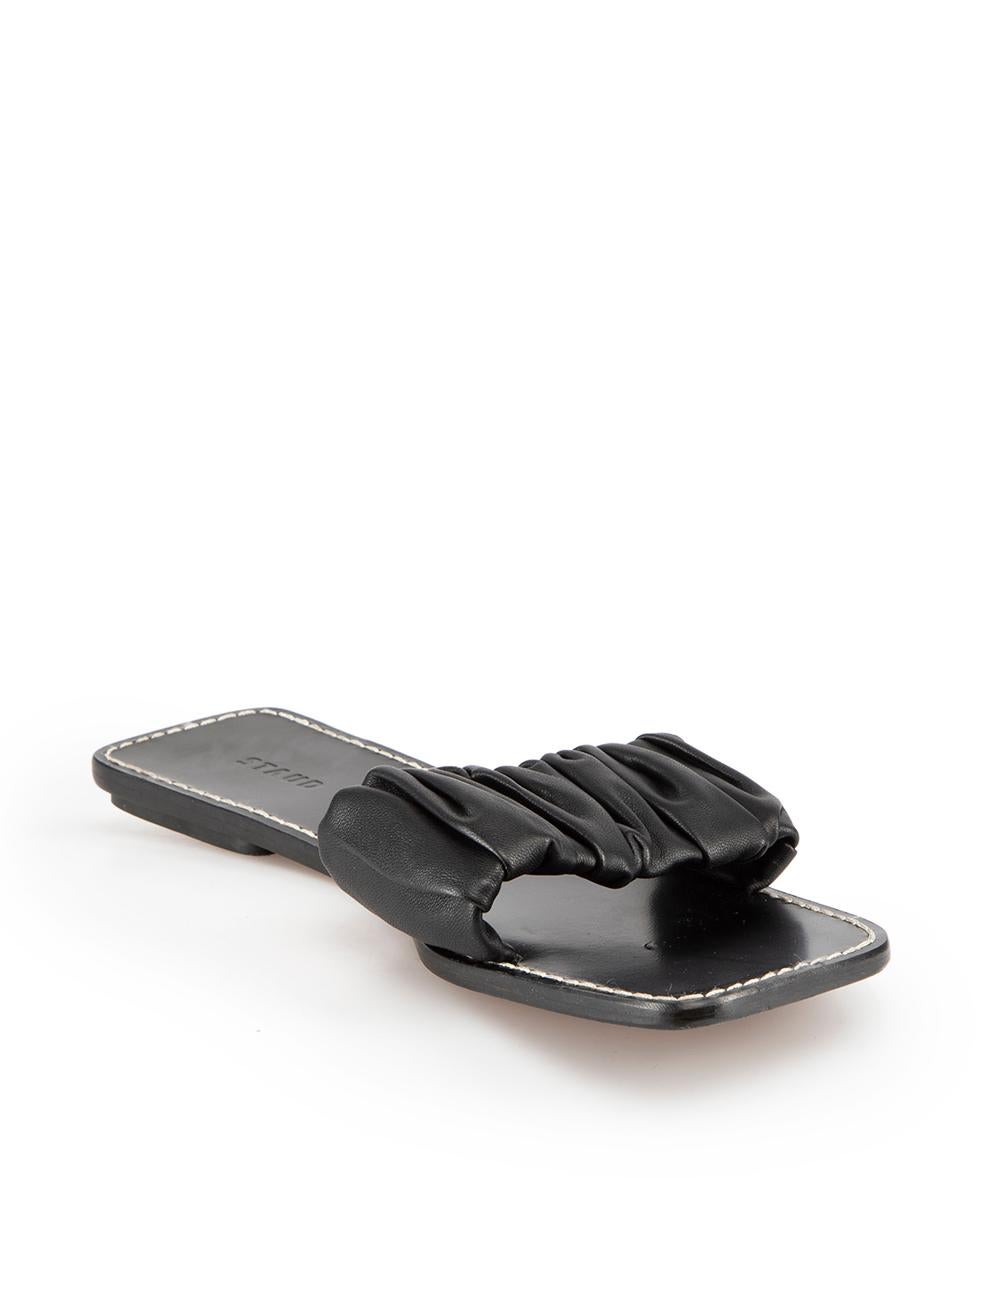 CONDITION is Very good. Minimal wear to shoes is evident. Minimal wear to the left shoe footbed with a scratch to the leather on this used STAUD designer resale item.
 
 Details
 Black
 Leather
 Slide sandals
 Ruched accent strap
 Open square toe
